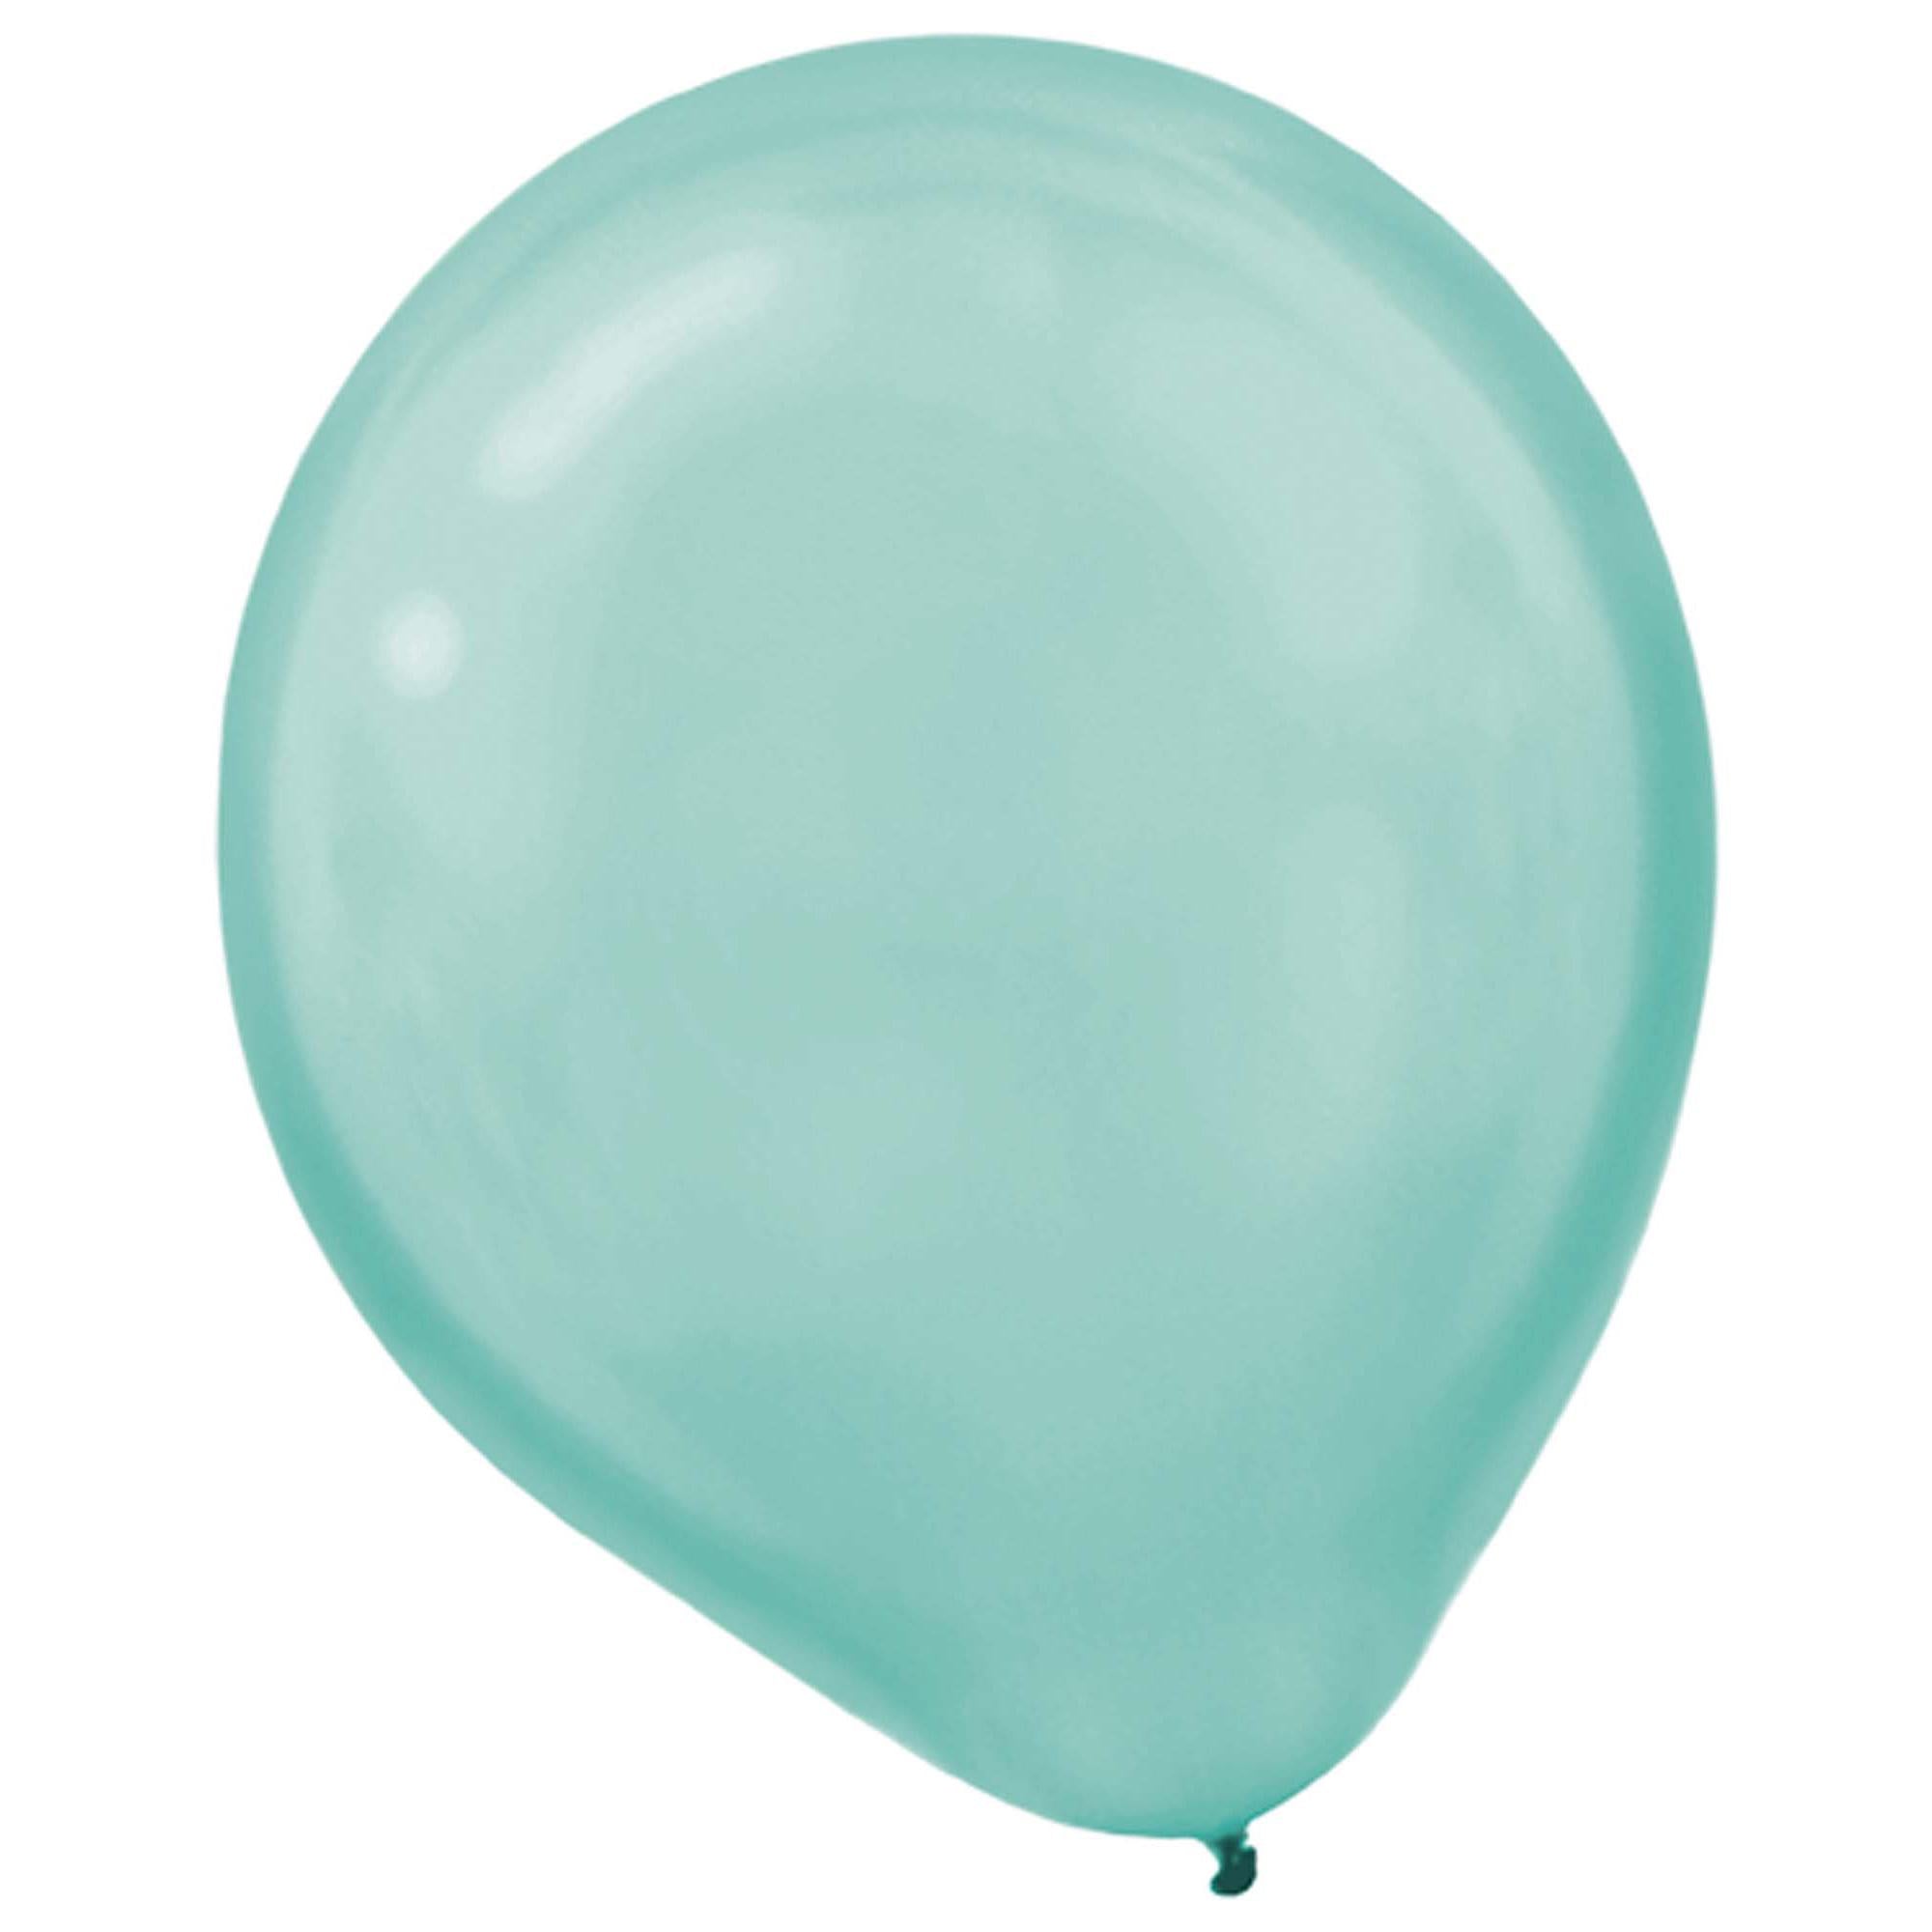 Robins Egg Blue Pearlized Latex Balloons 12in, 15pcs Balloons & Streamers - Party Centre